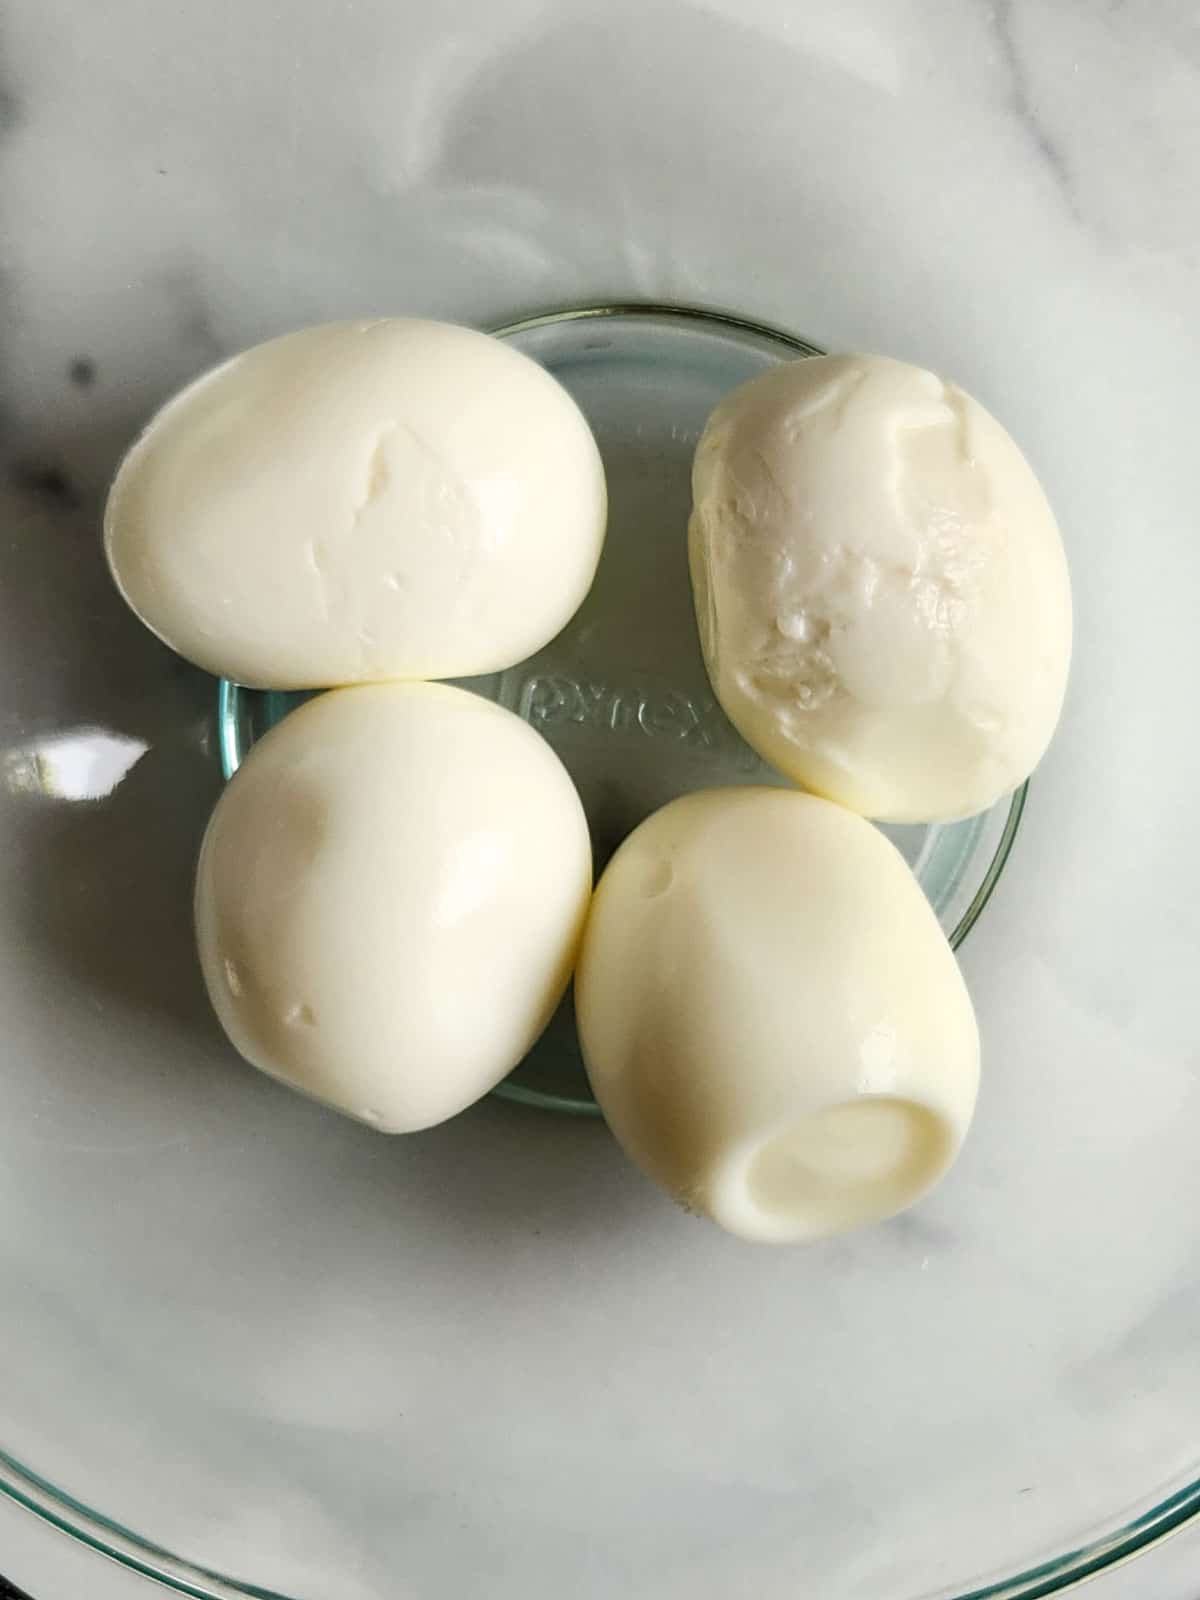 Hard-boiled eggs in a bowl.